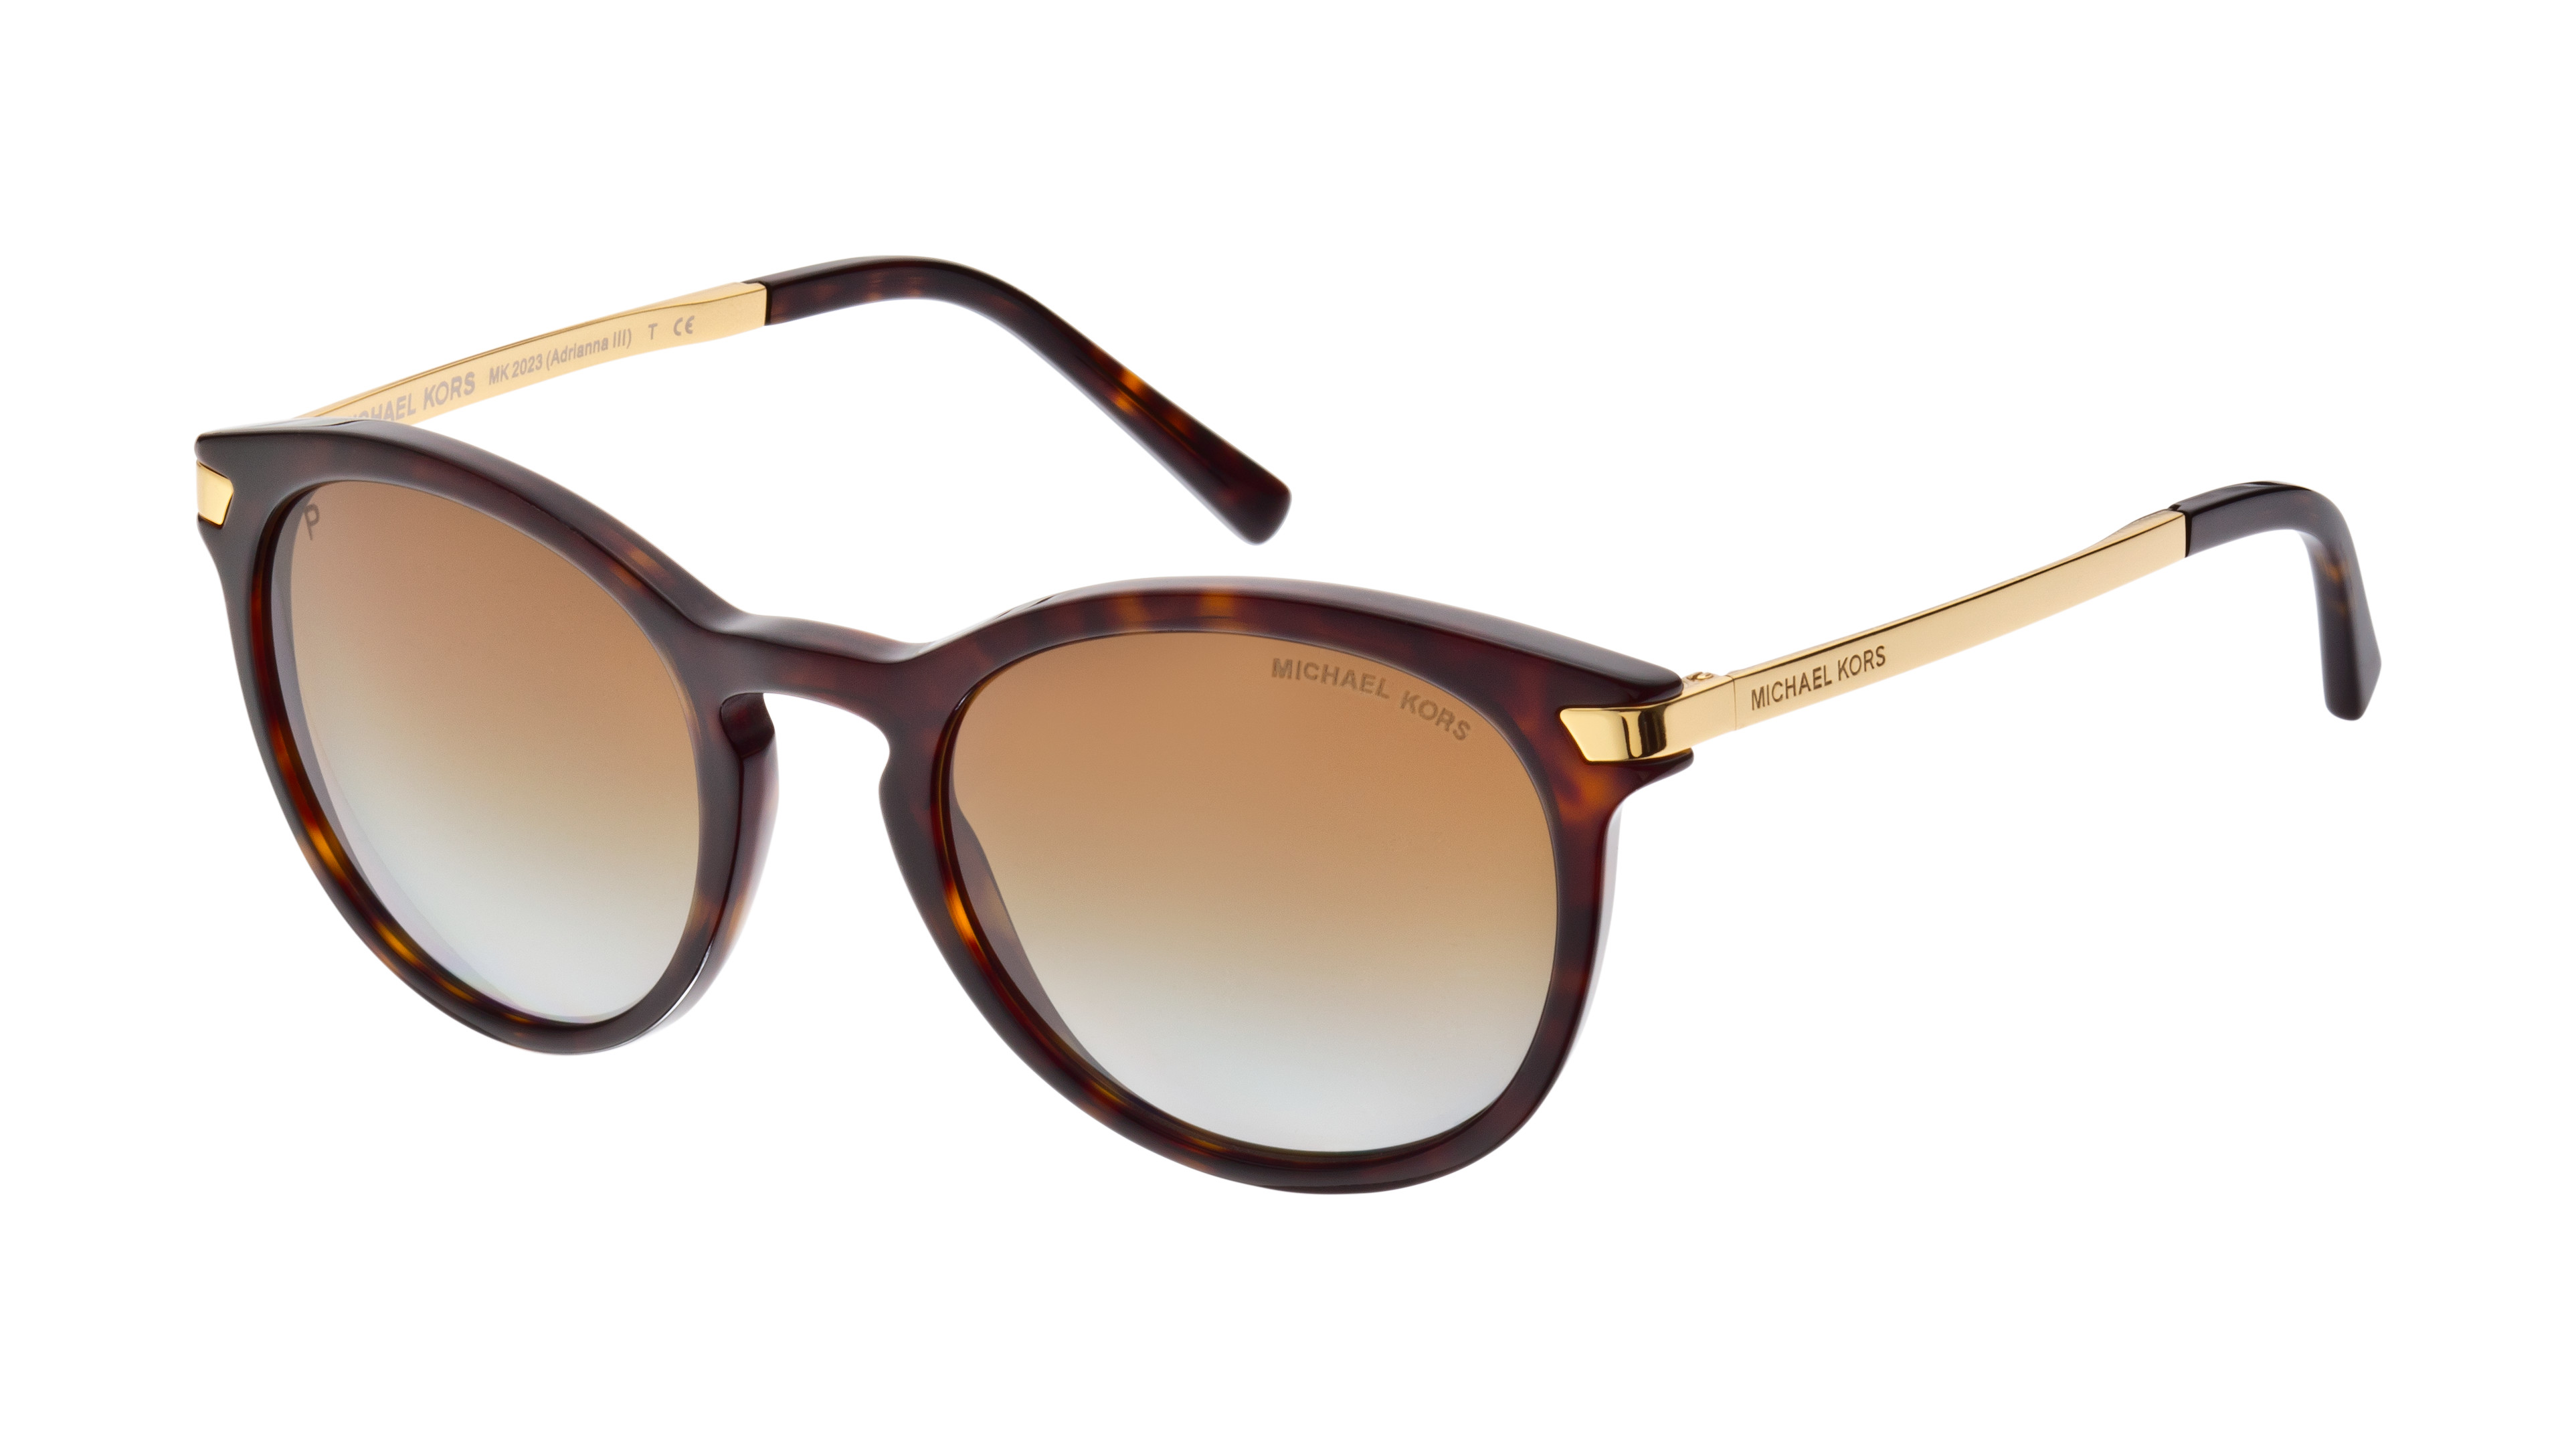 [products.image.angle_left01] Michael Kors ADRIANNA III 0MK2023 3106T5 Sonnenbrille